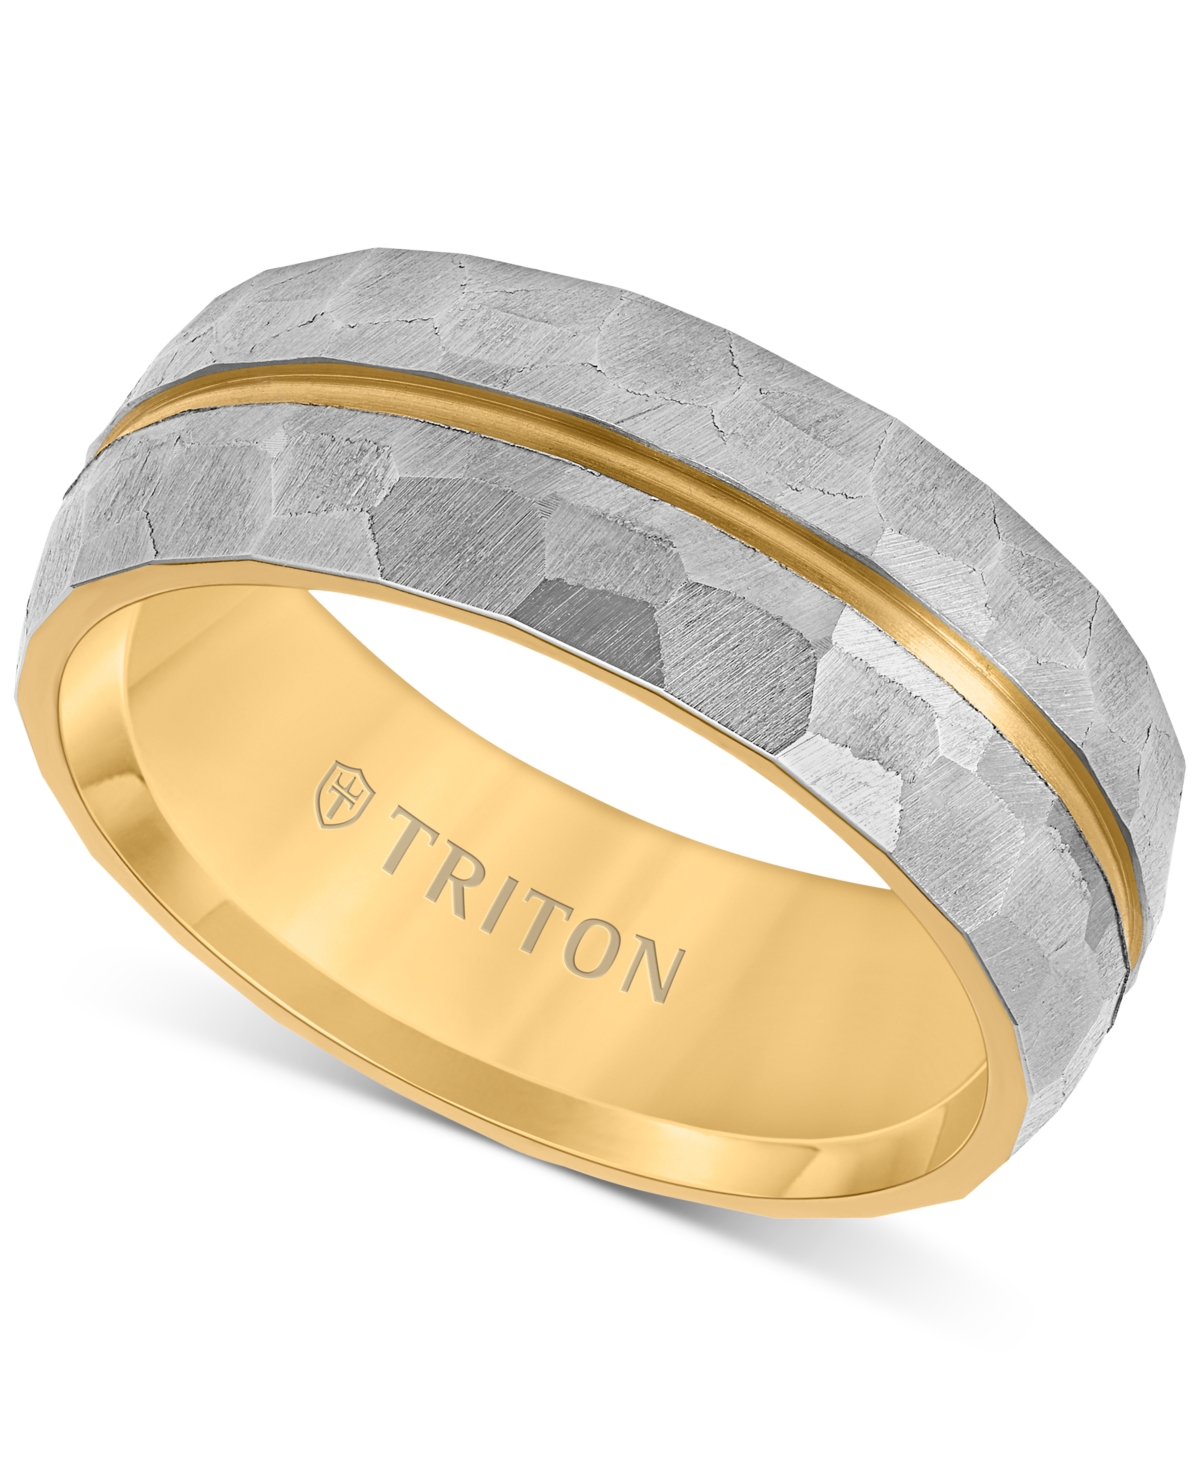 Men's Double Row Comfort Fit Wedding Band in Titanium & Yellow Pvd-Plate - Gray, Yellow